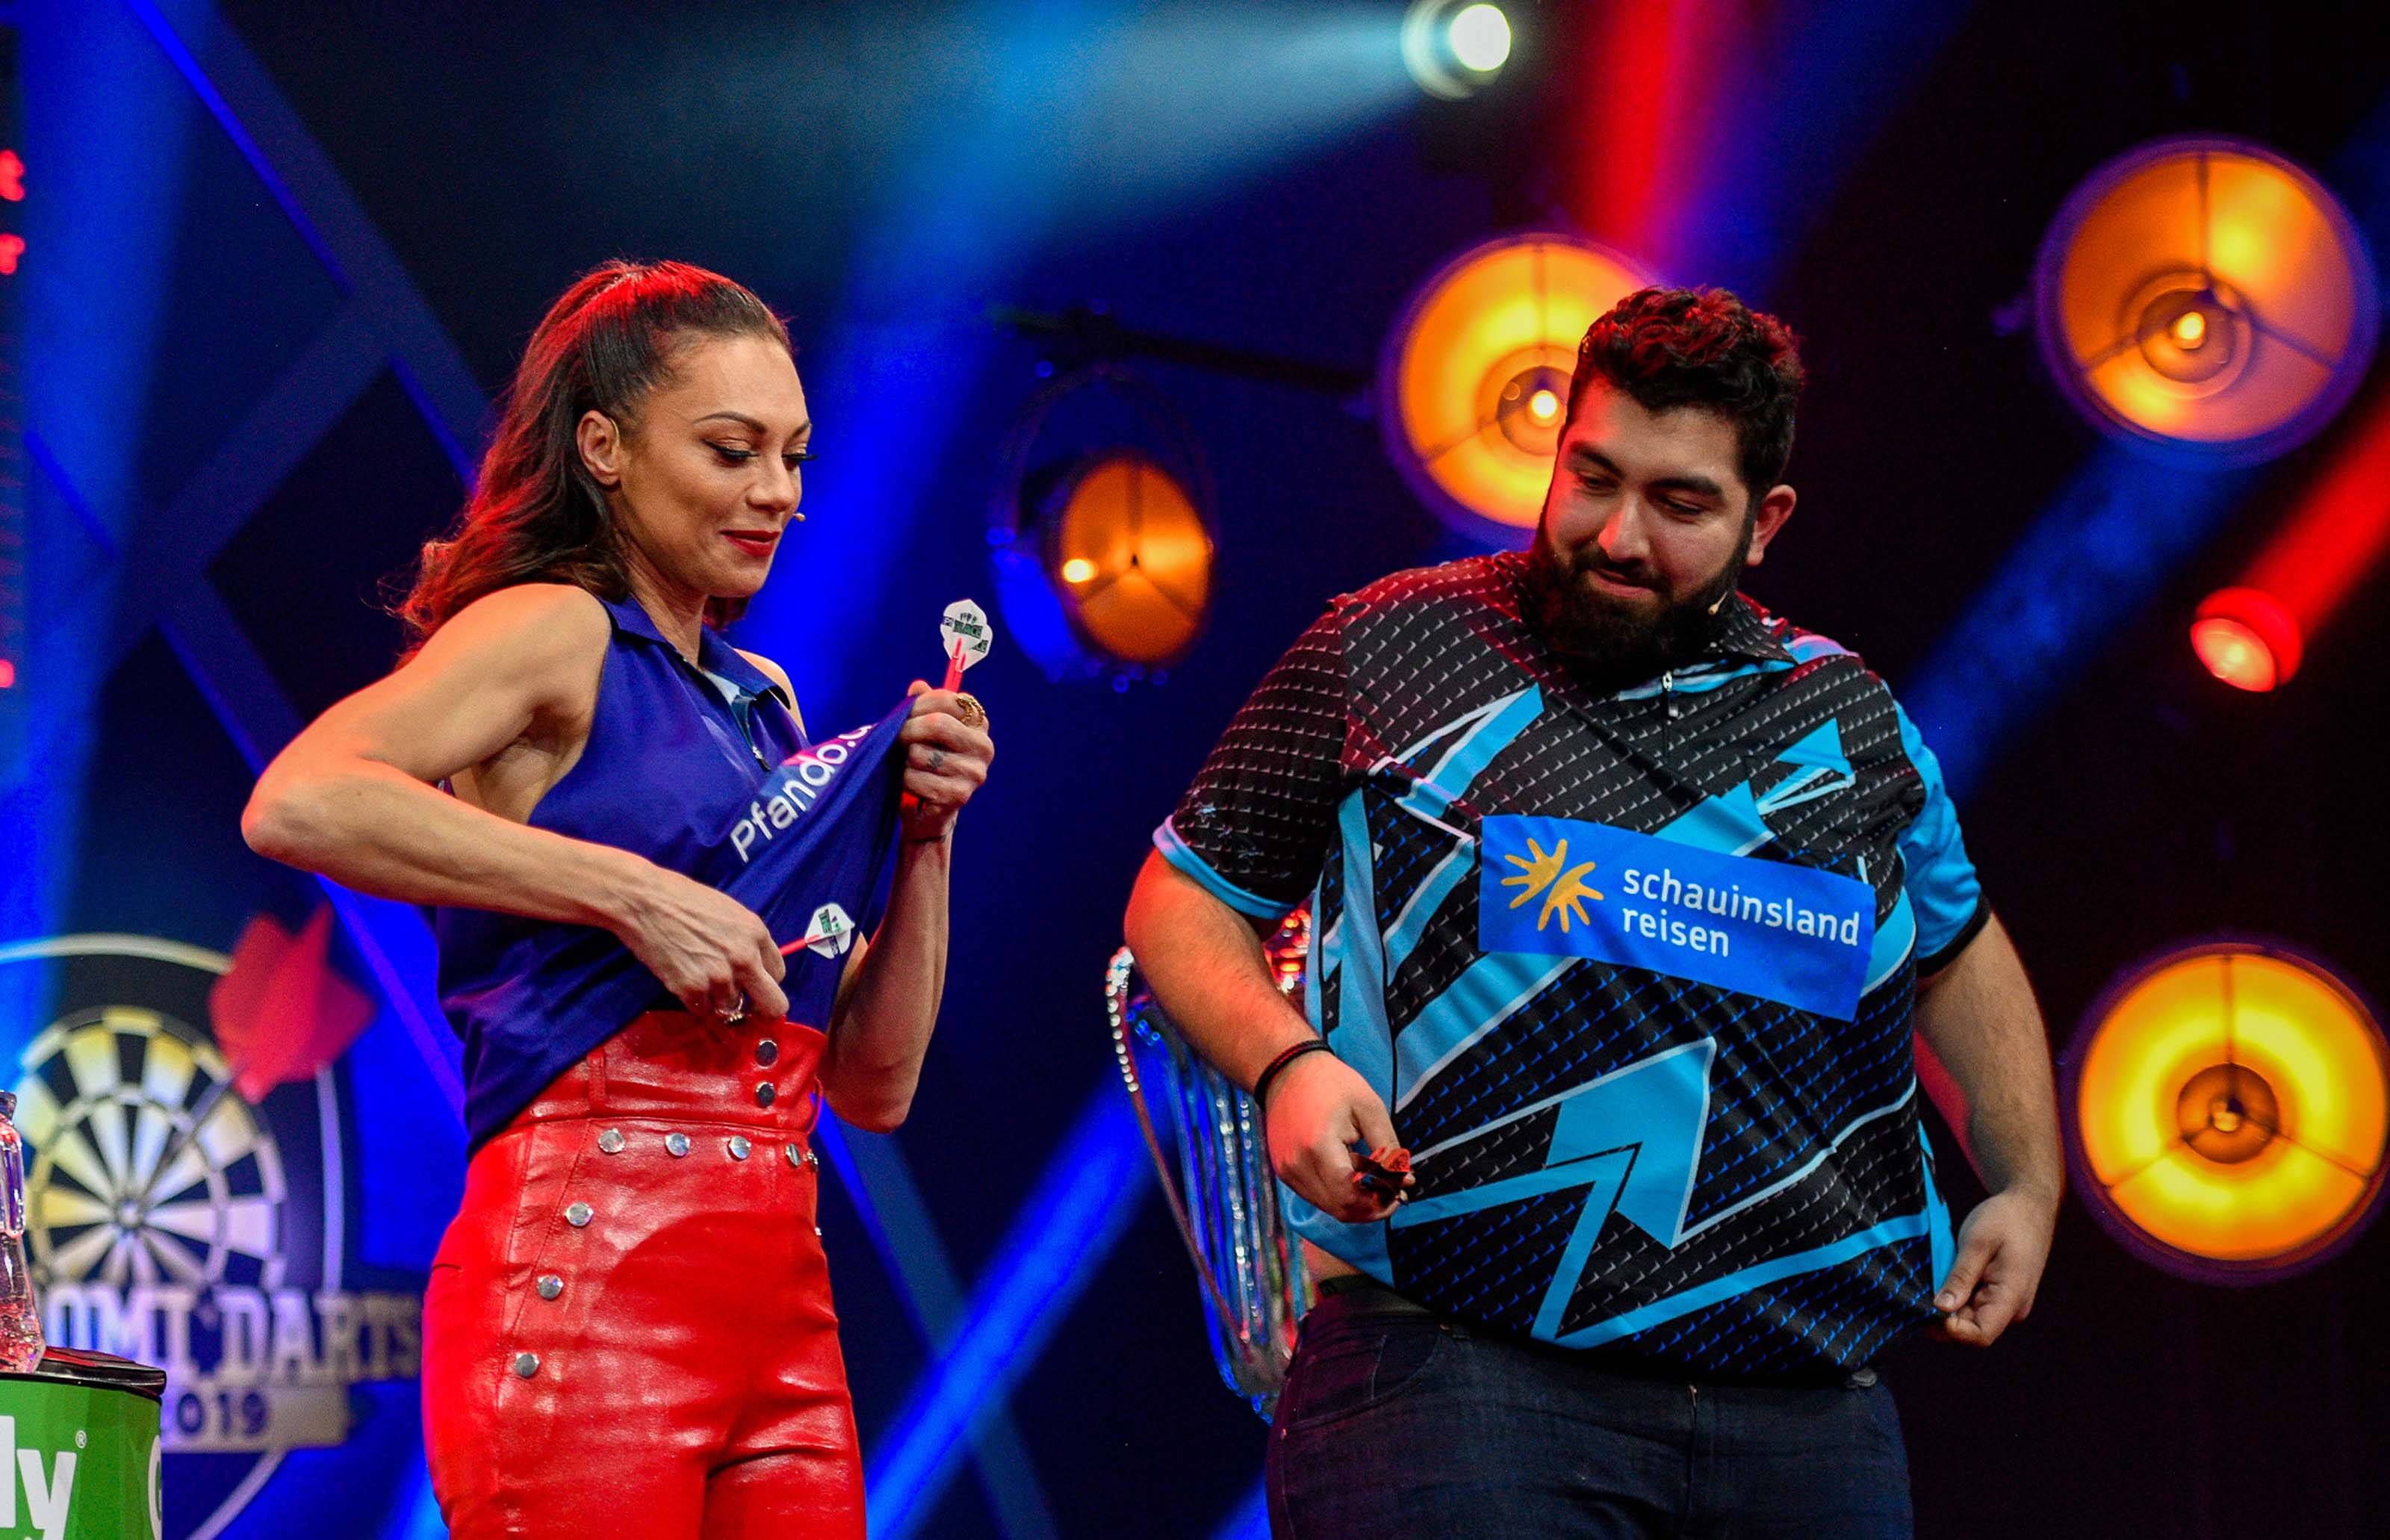 Lilly Becker at Promi Darts 2019